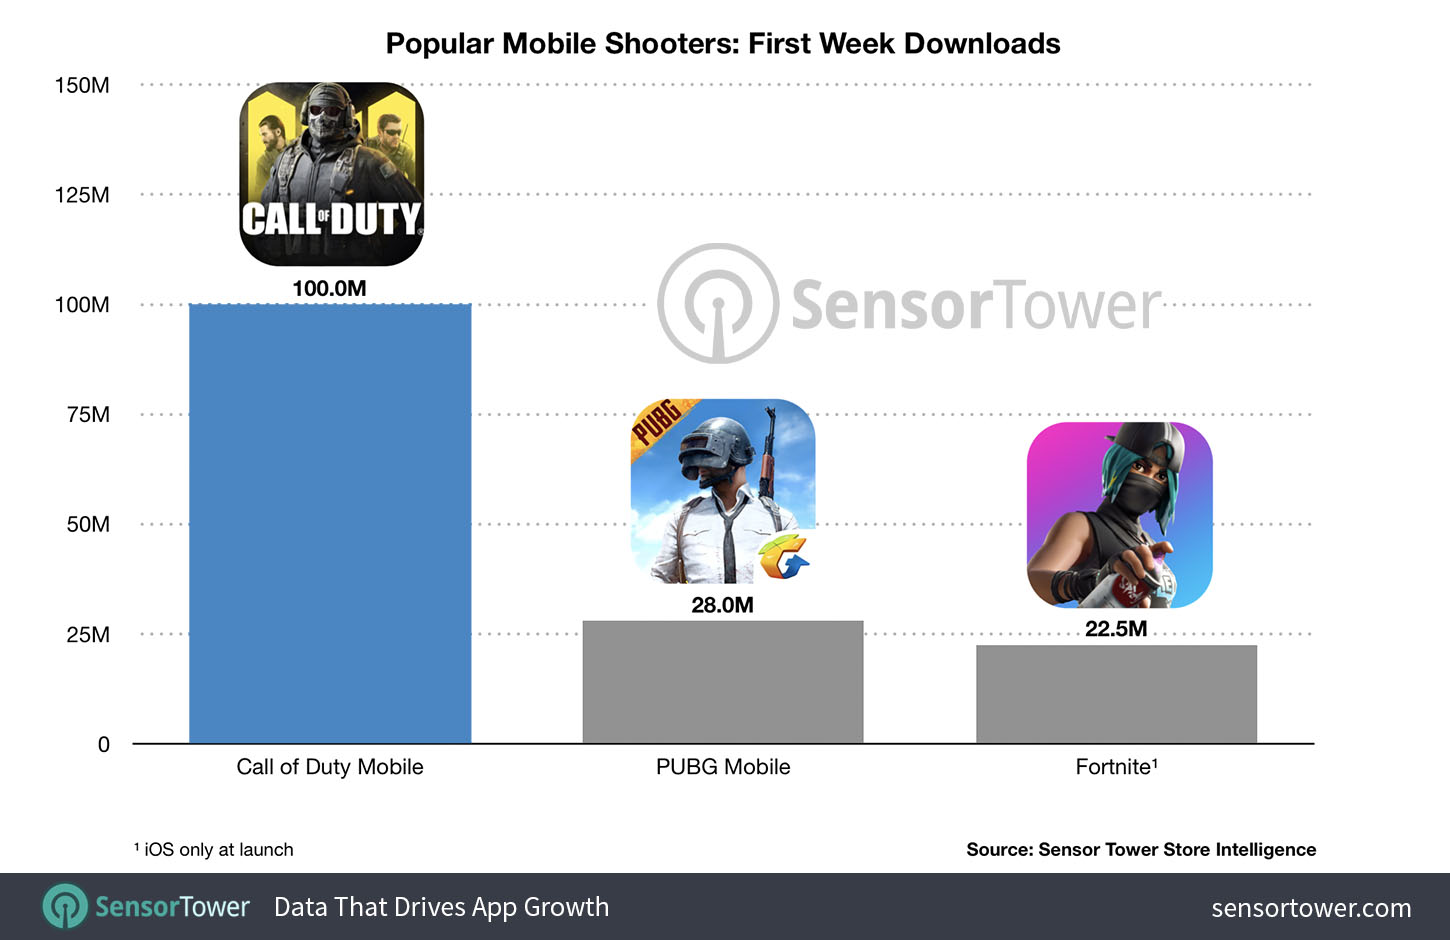 Call of Duty Mobile Breaks Record with 100 Million Downloads in